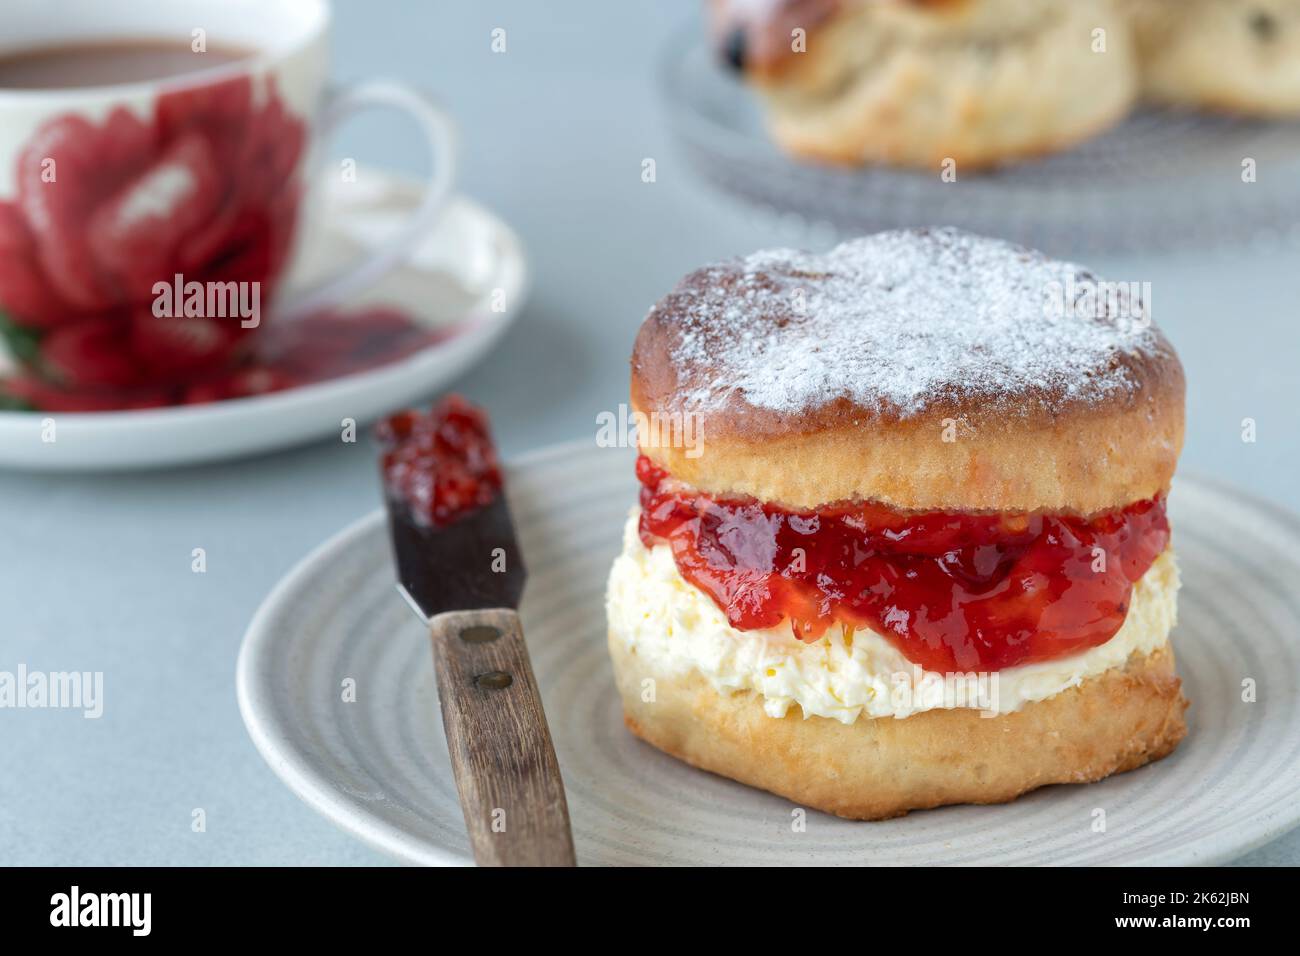 A fresh traditional English home made scone. The cake is split and filled with jam and topped with thick clotted cream. A delicious Devon cream tea. Stock Photo